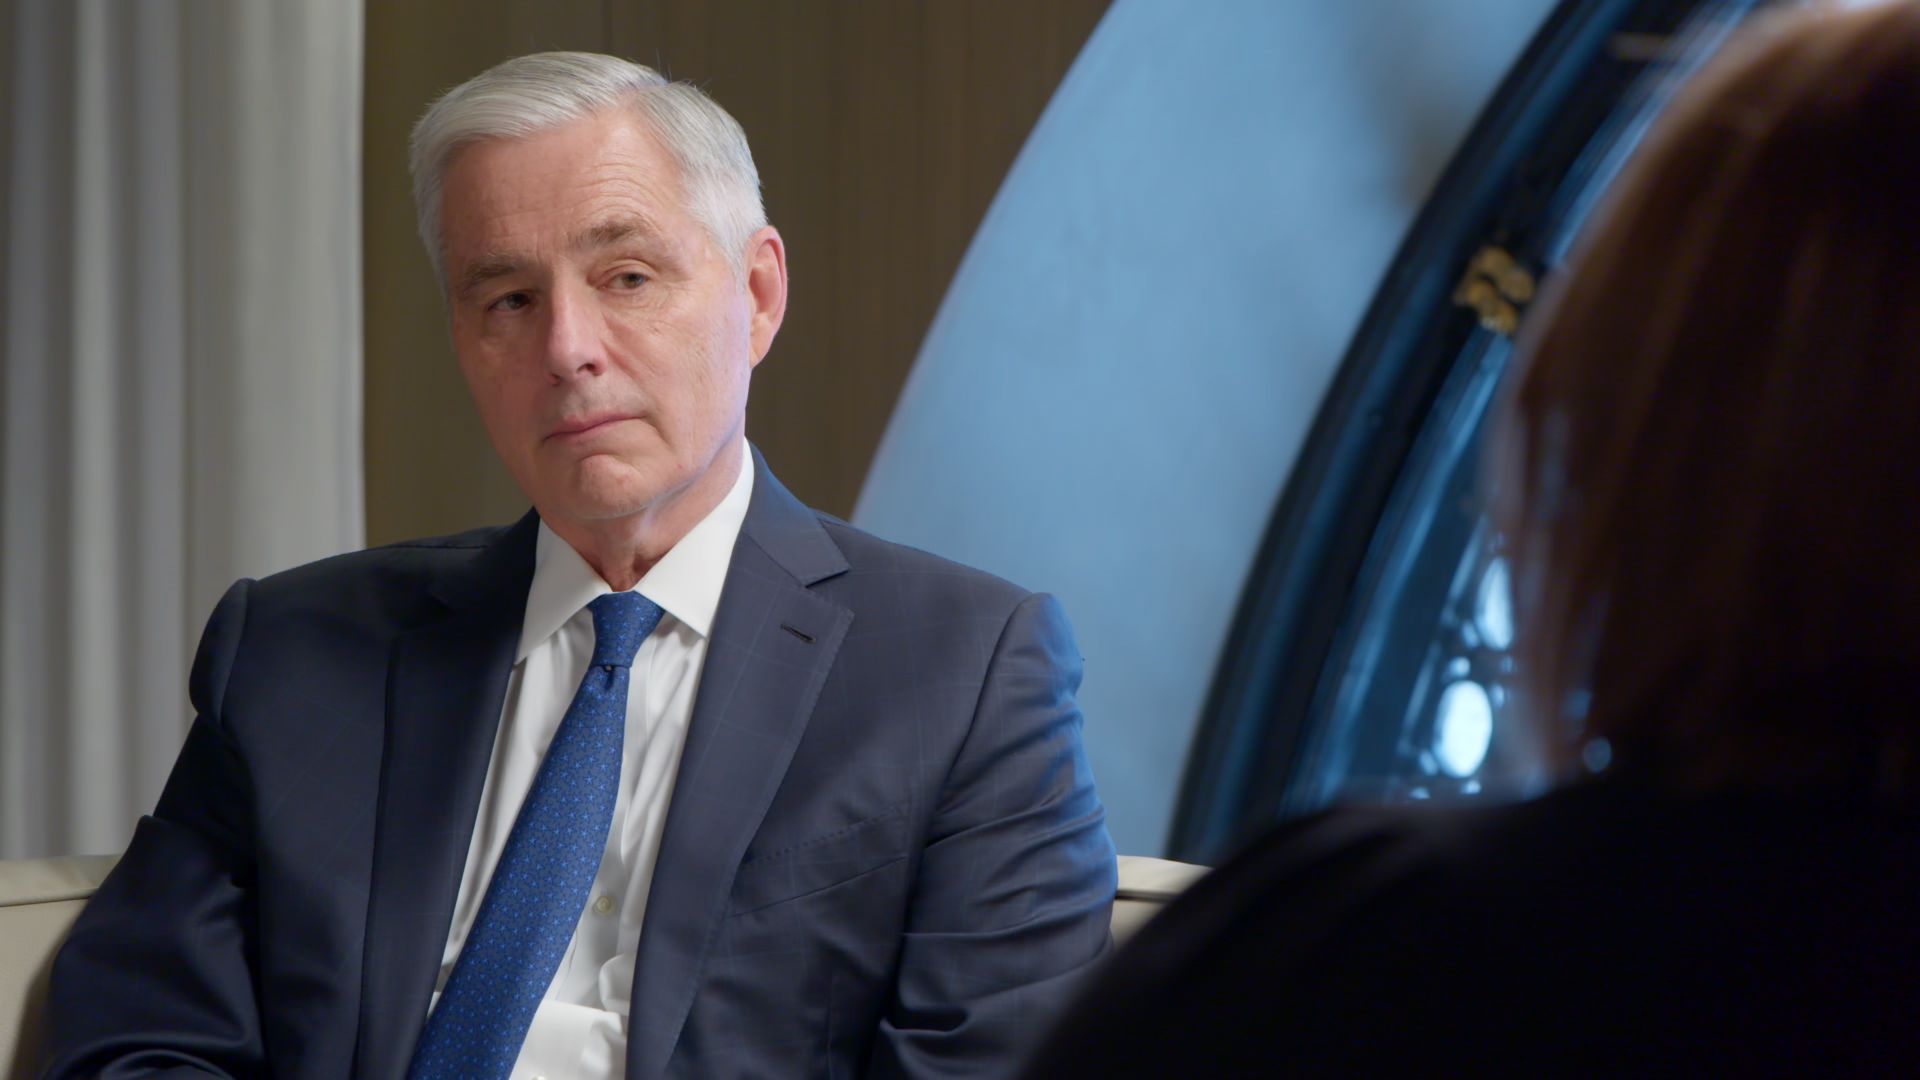 Amtrak CEO Bill Flynn is seen during an interview with 